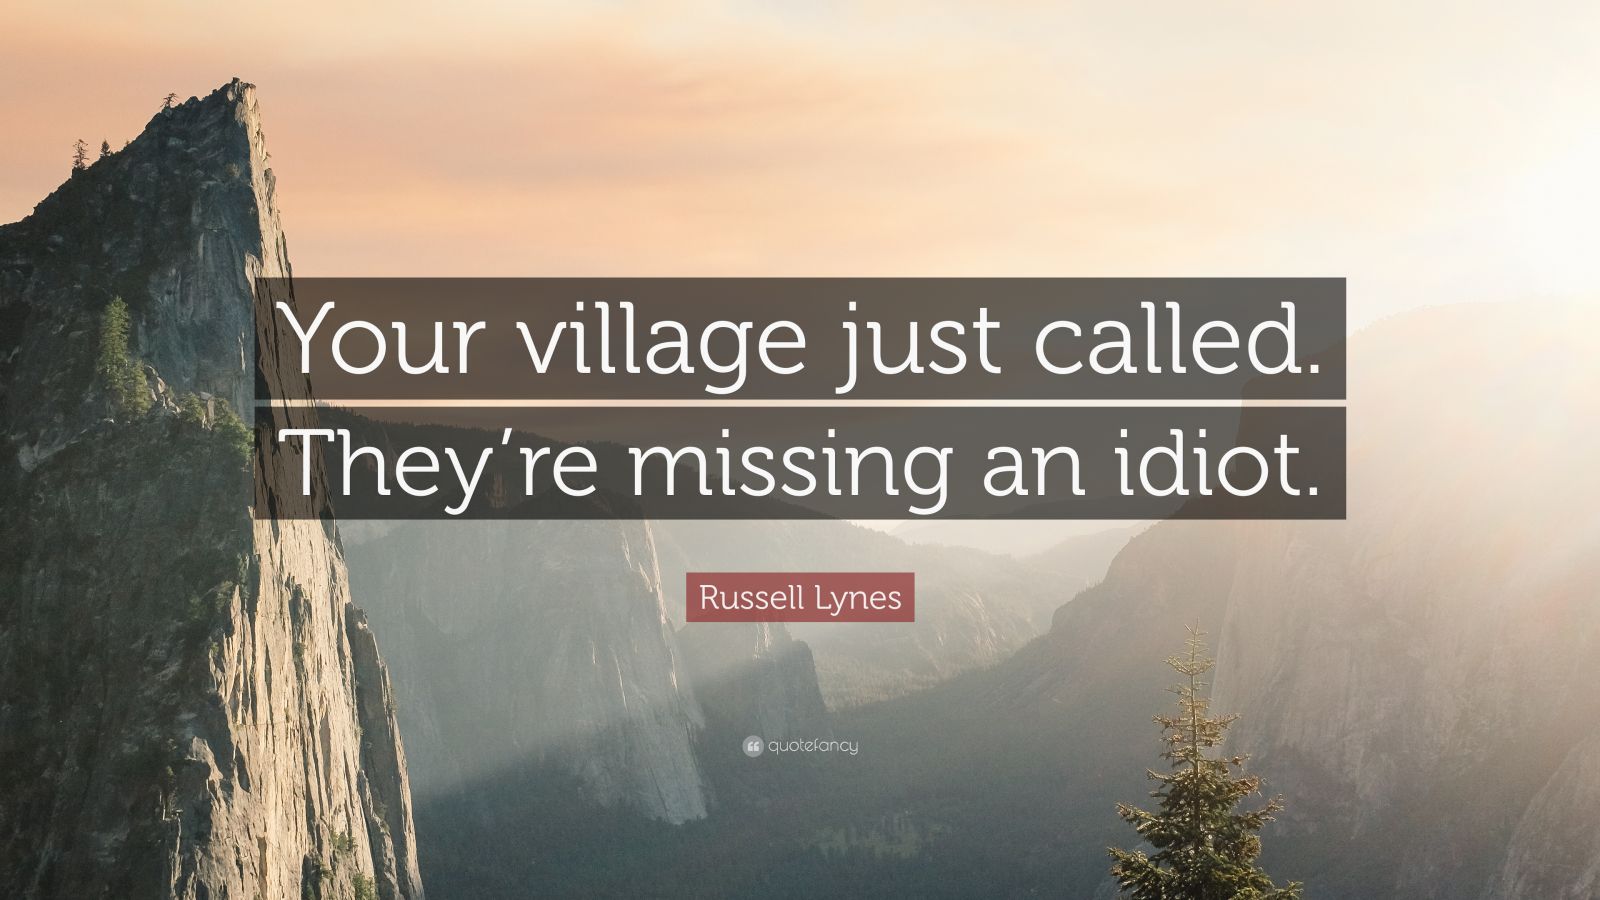 Russell Lynes Quote “your Village Just Called Theyre Missing An Idiot” 7 Wallpapers